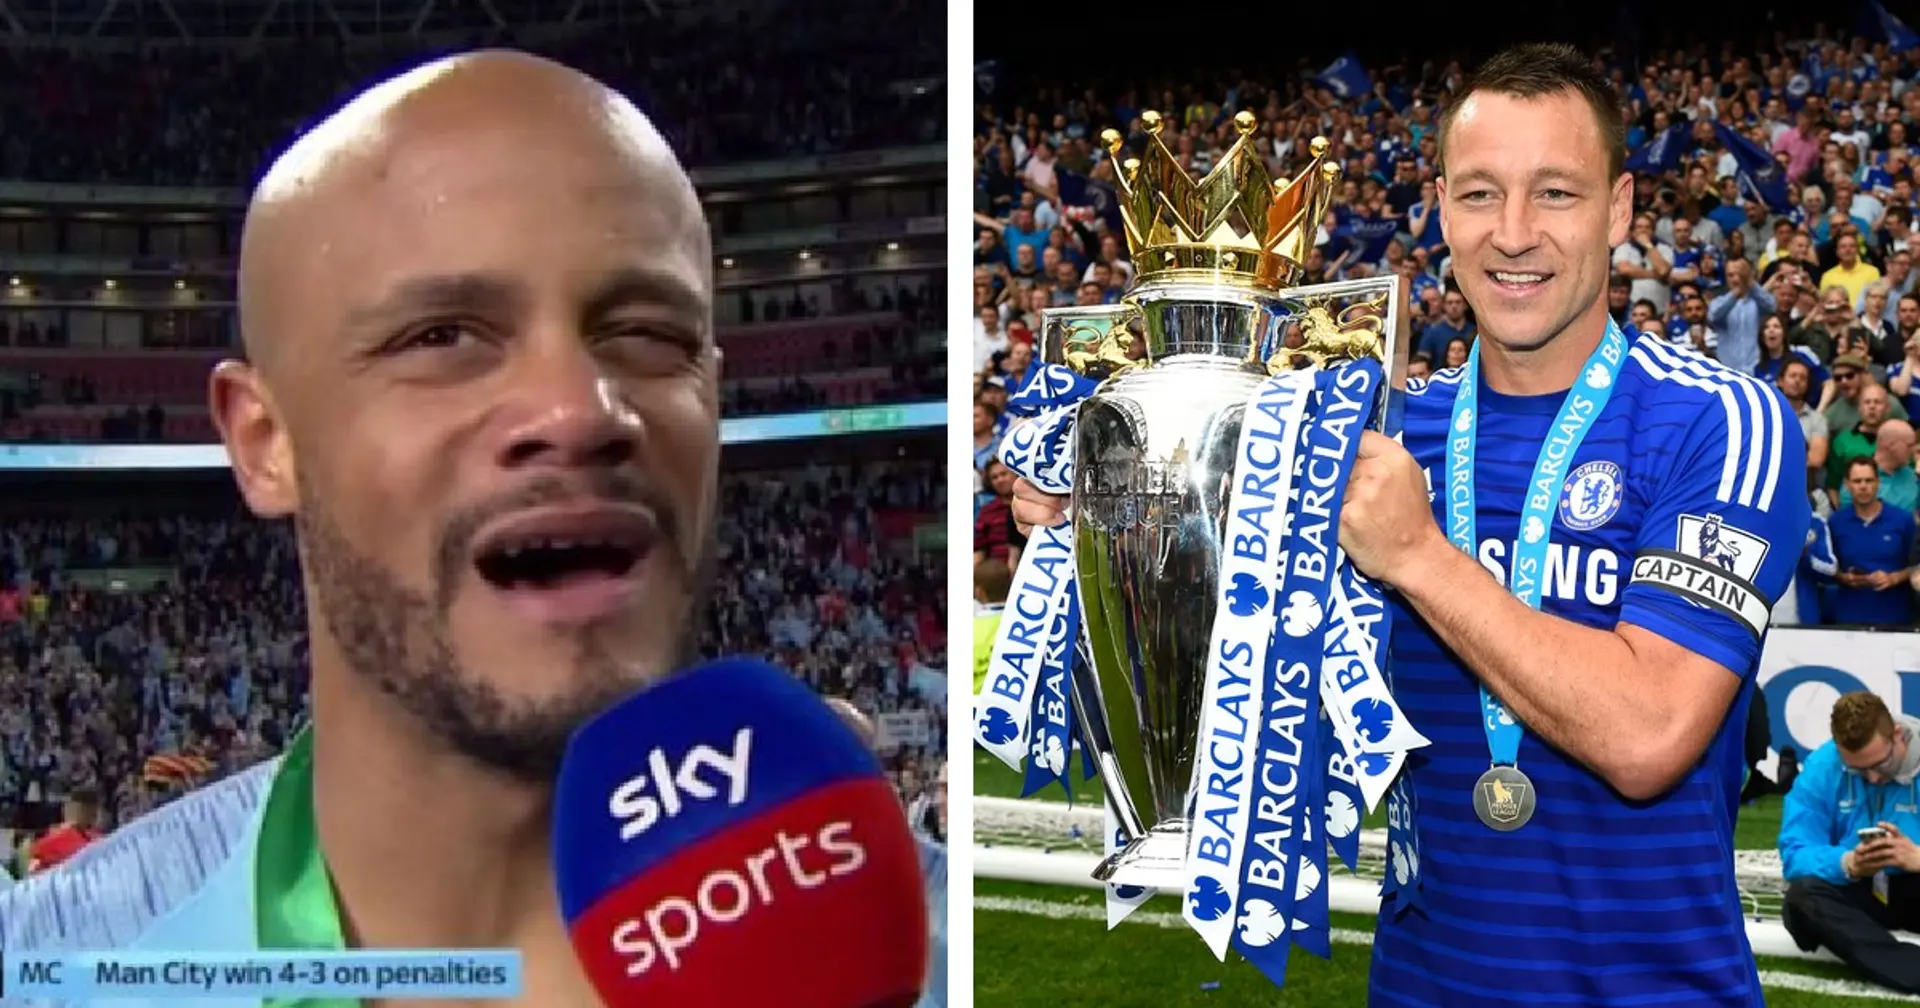 'Just doesn't make sense to me': Fans left baffled as Kompany gets inducted into Hall of Fame but John Terry doesn't